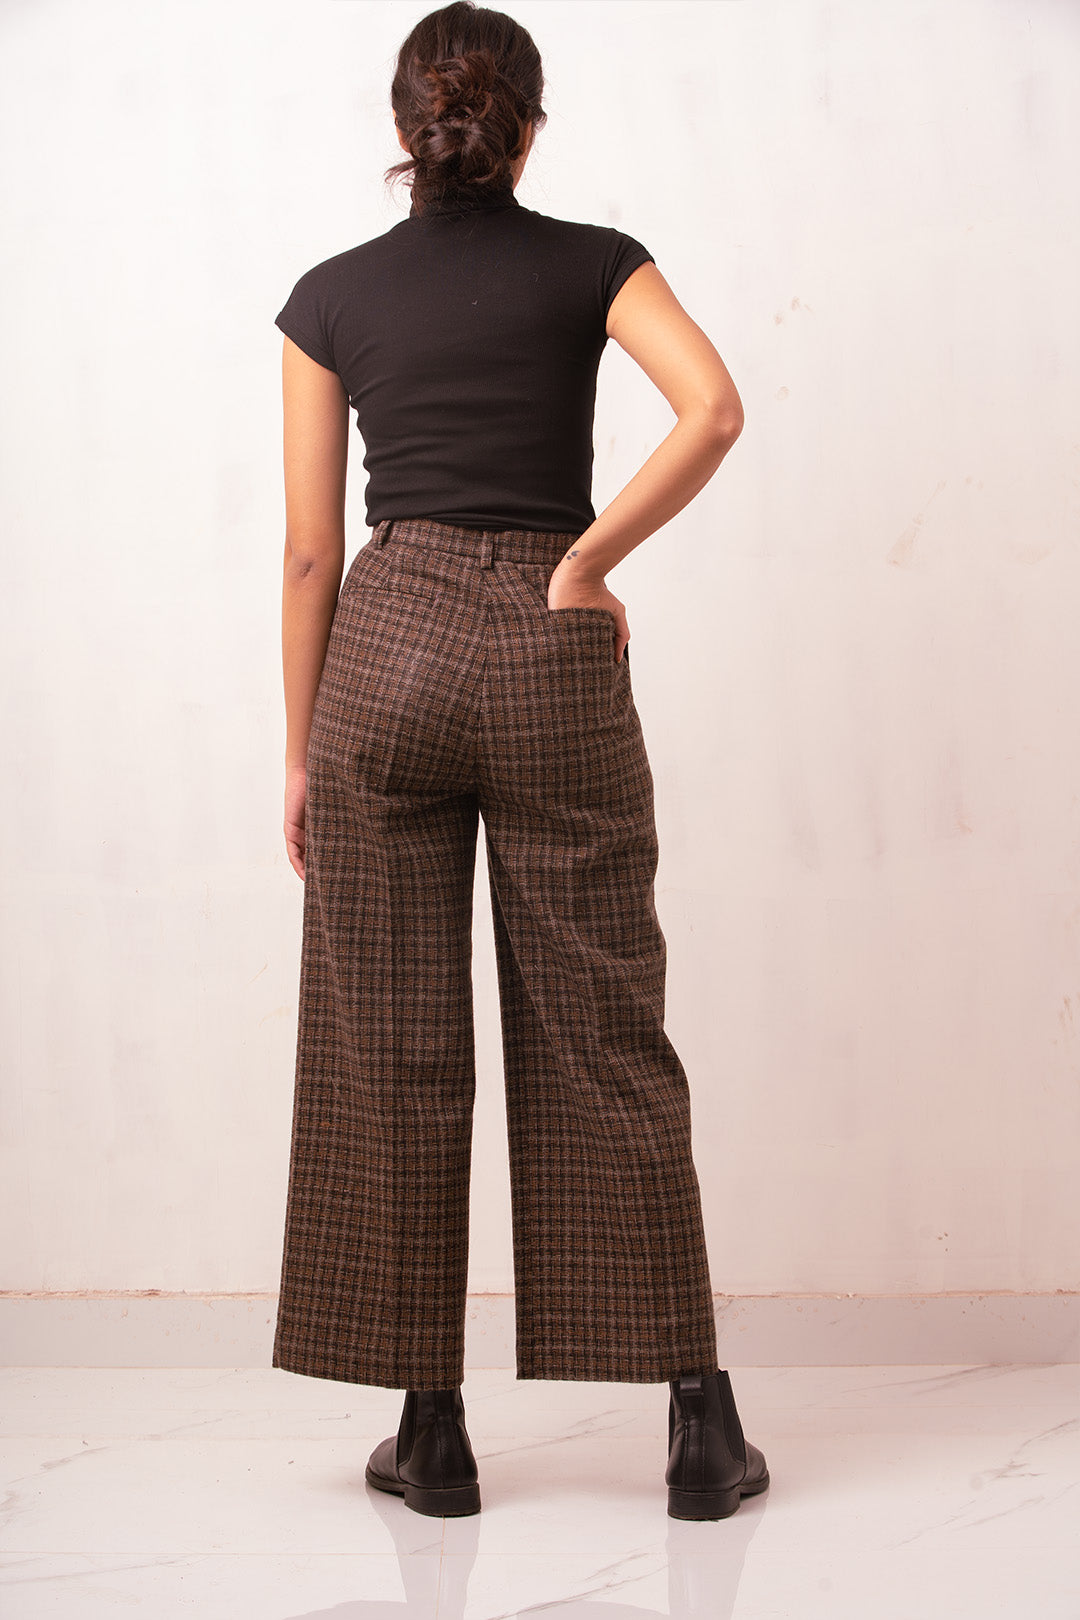 Jeans & Trousers | Black Woolen Pants For Womens | Freeup